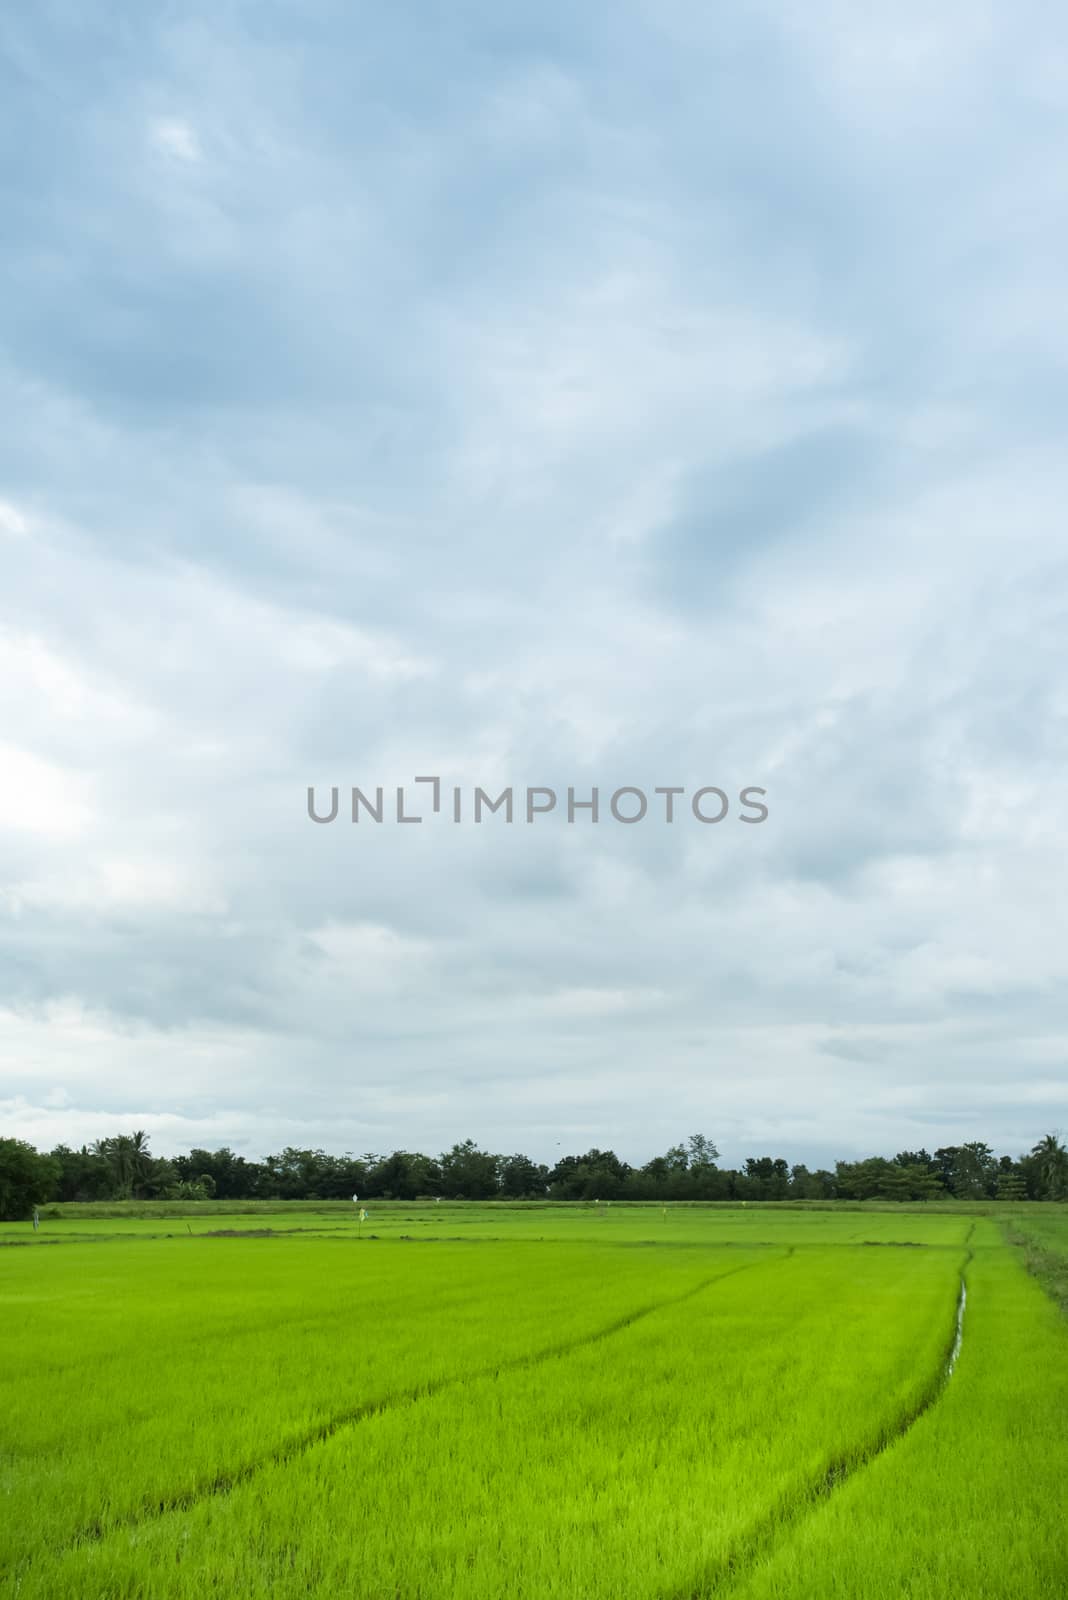 Green rice field in a cloudy day Sukhothai Province, Thailand